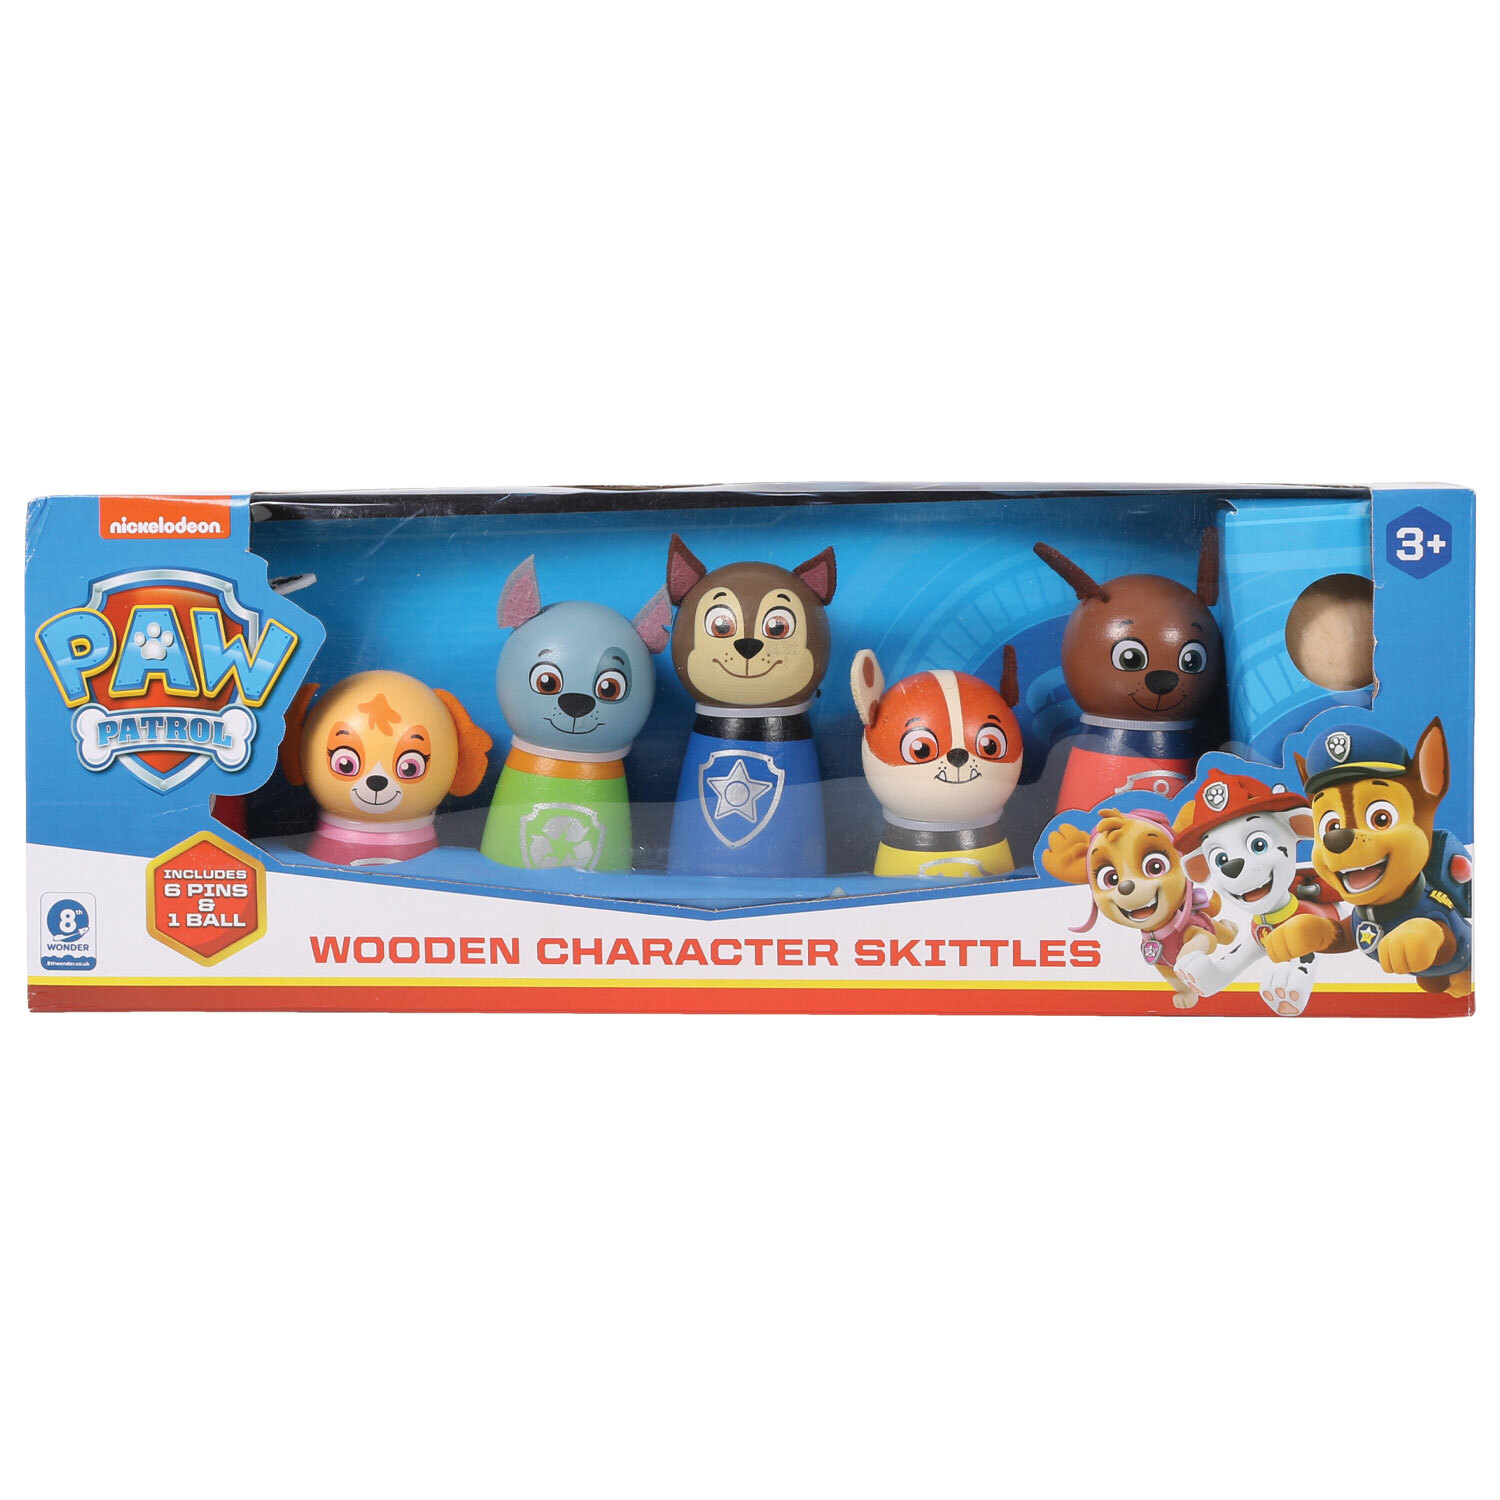 Paw Patrol Wooden Character Skittles Image 1